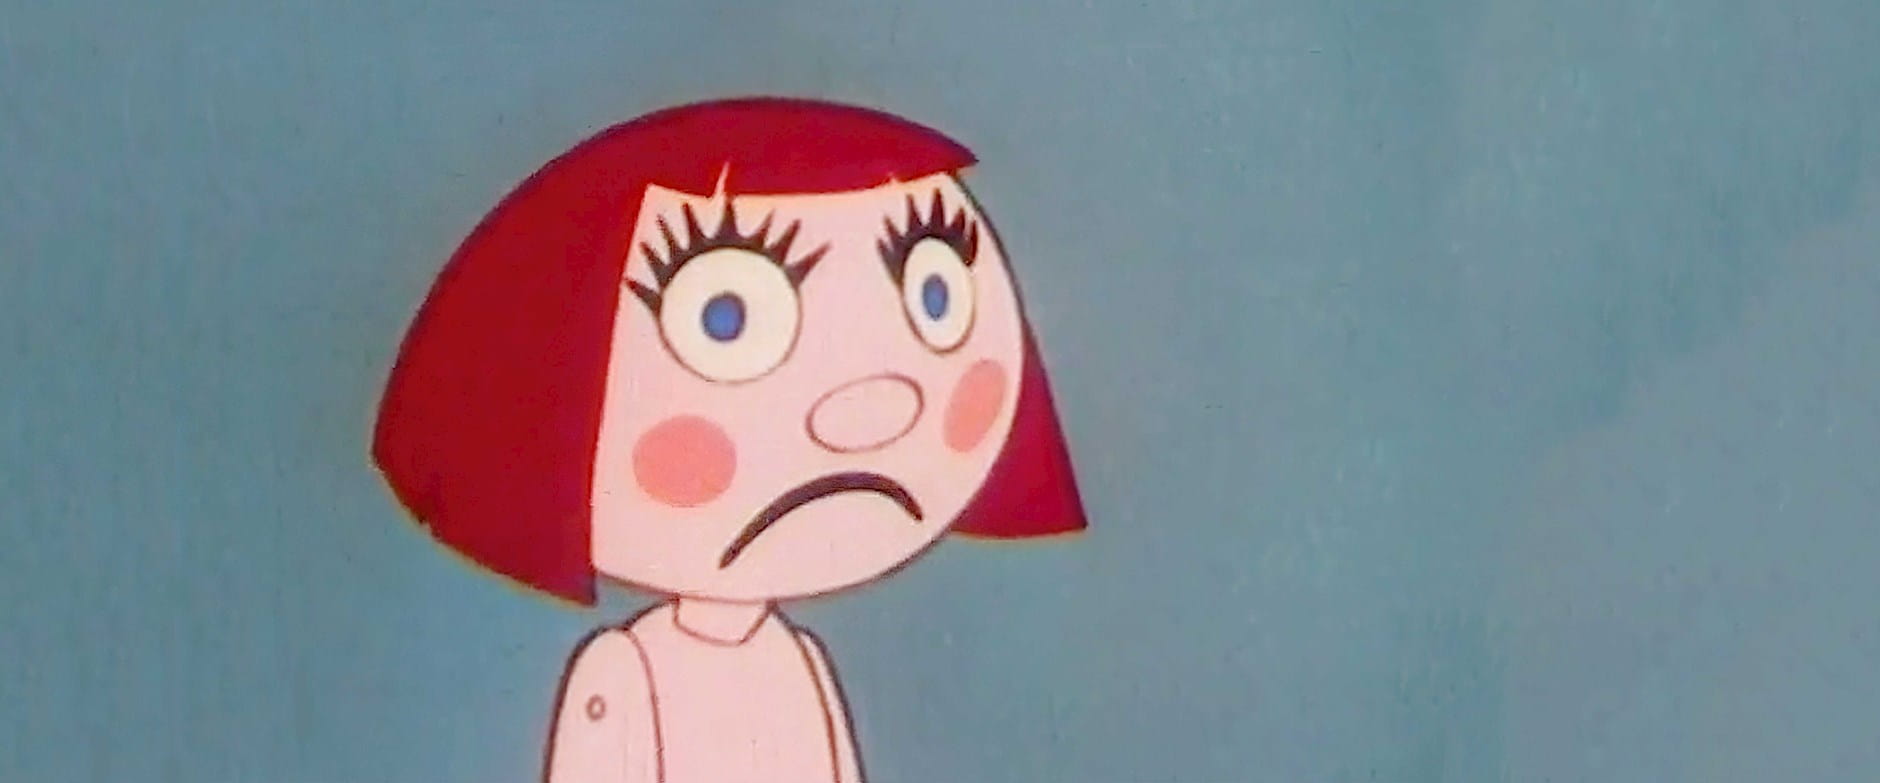 Cartoon doll with a frowny face